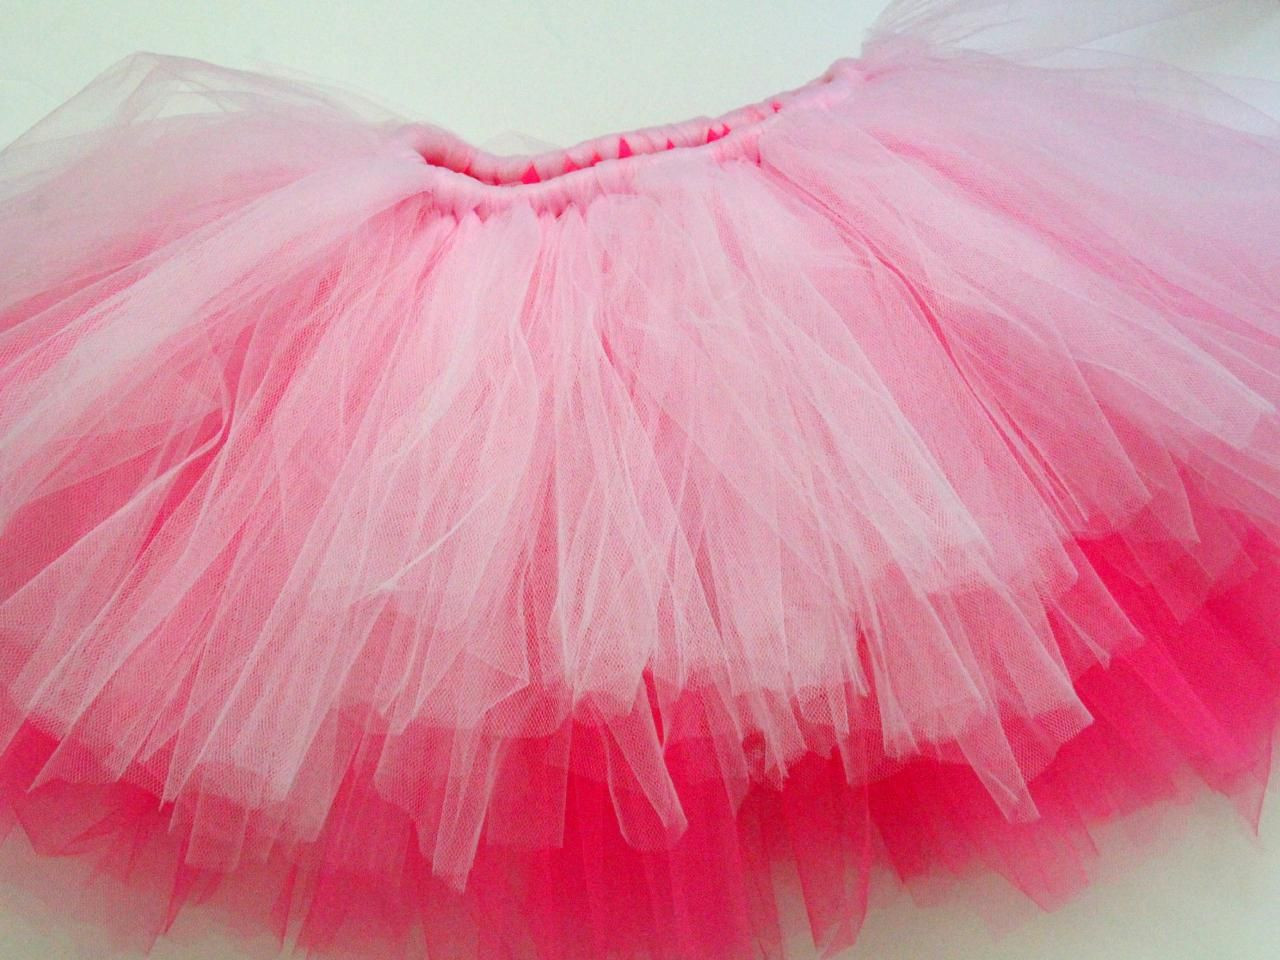 Toddler Tulle Skirt DIY
 How to Make a Classic Tulle Tutu